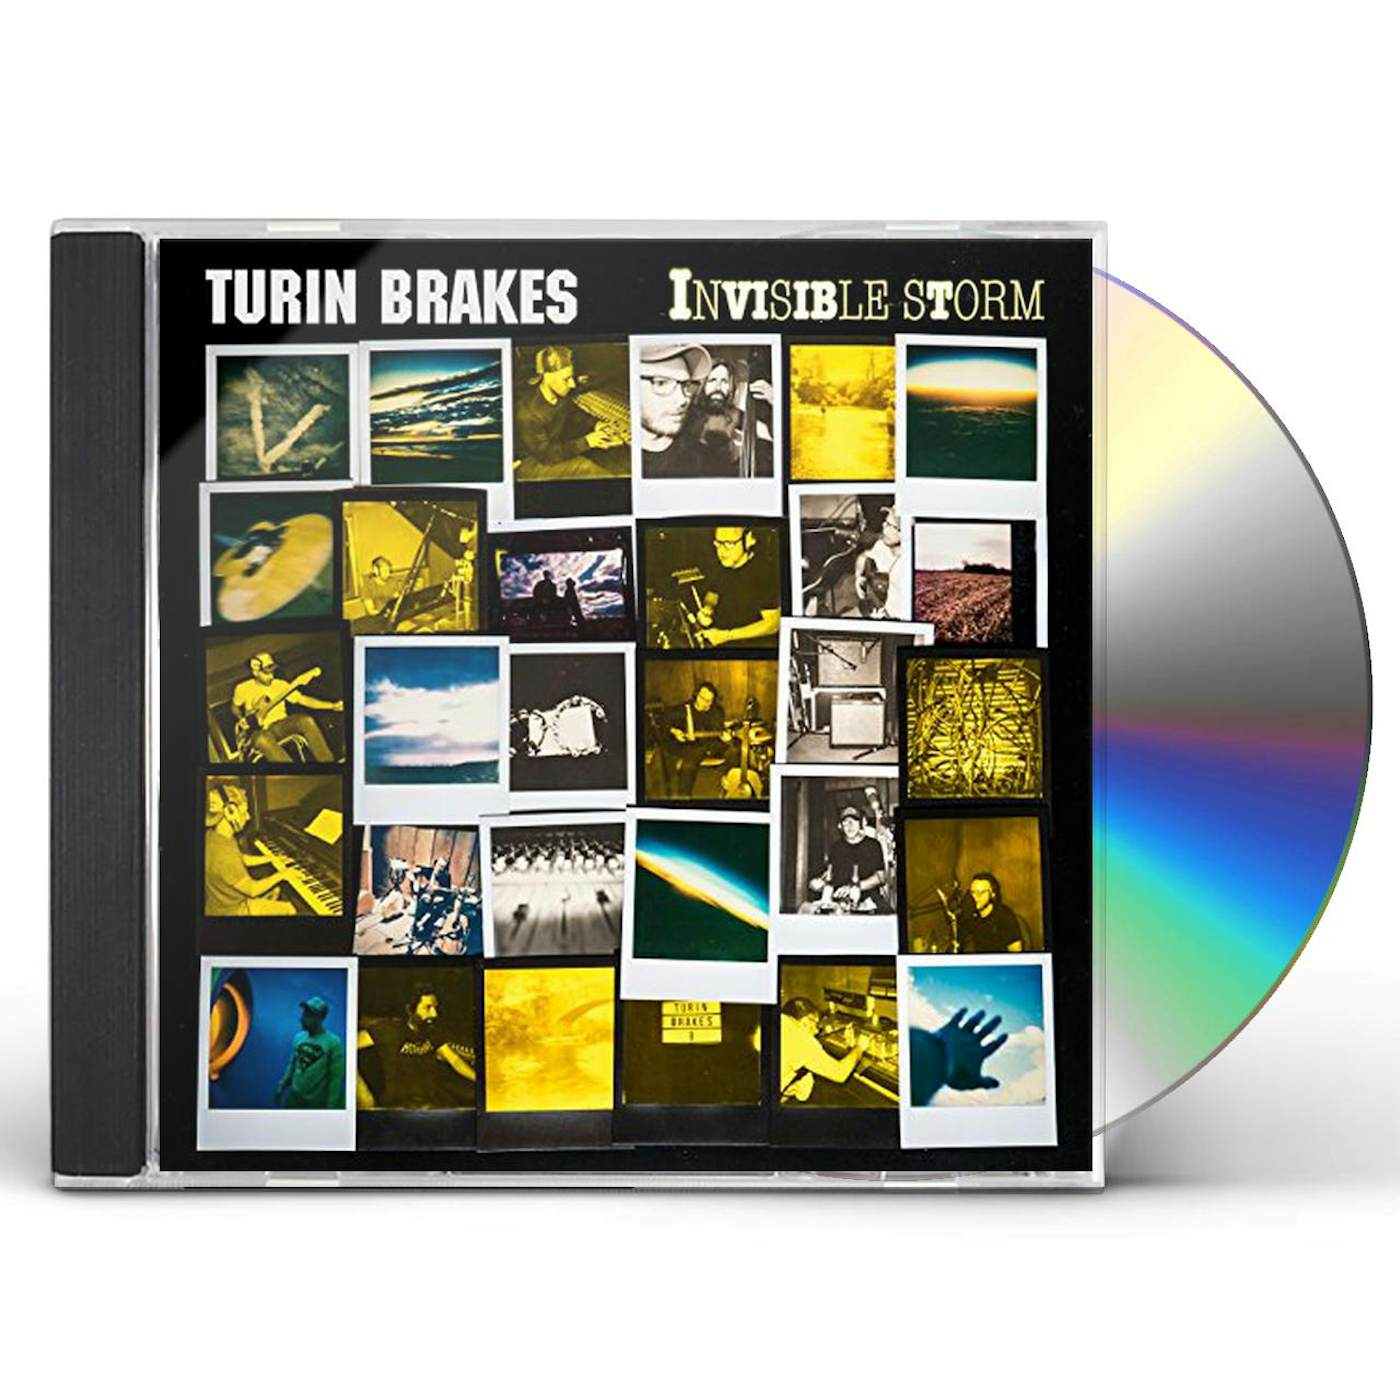 Turin Brakes INVISIBLE STORM CD